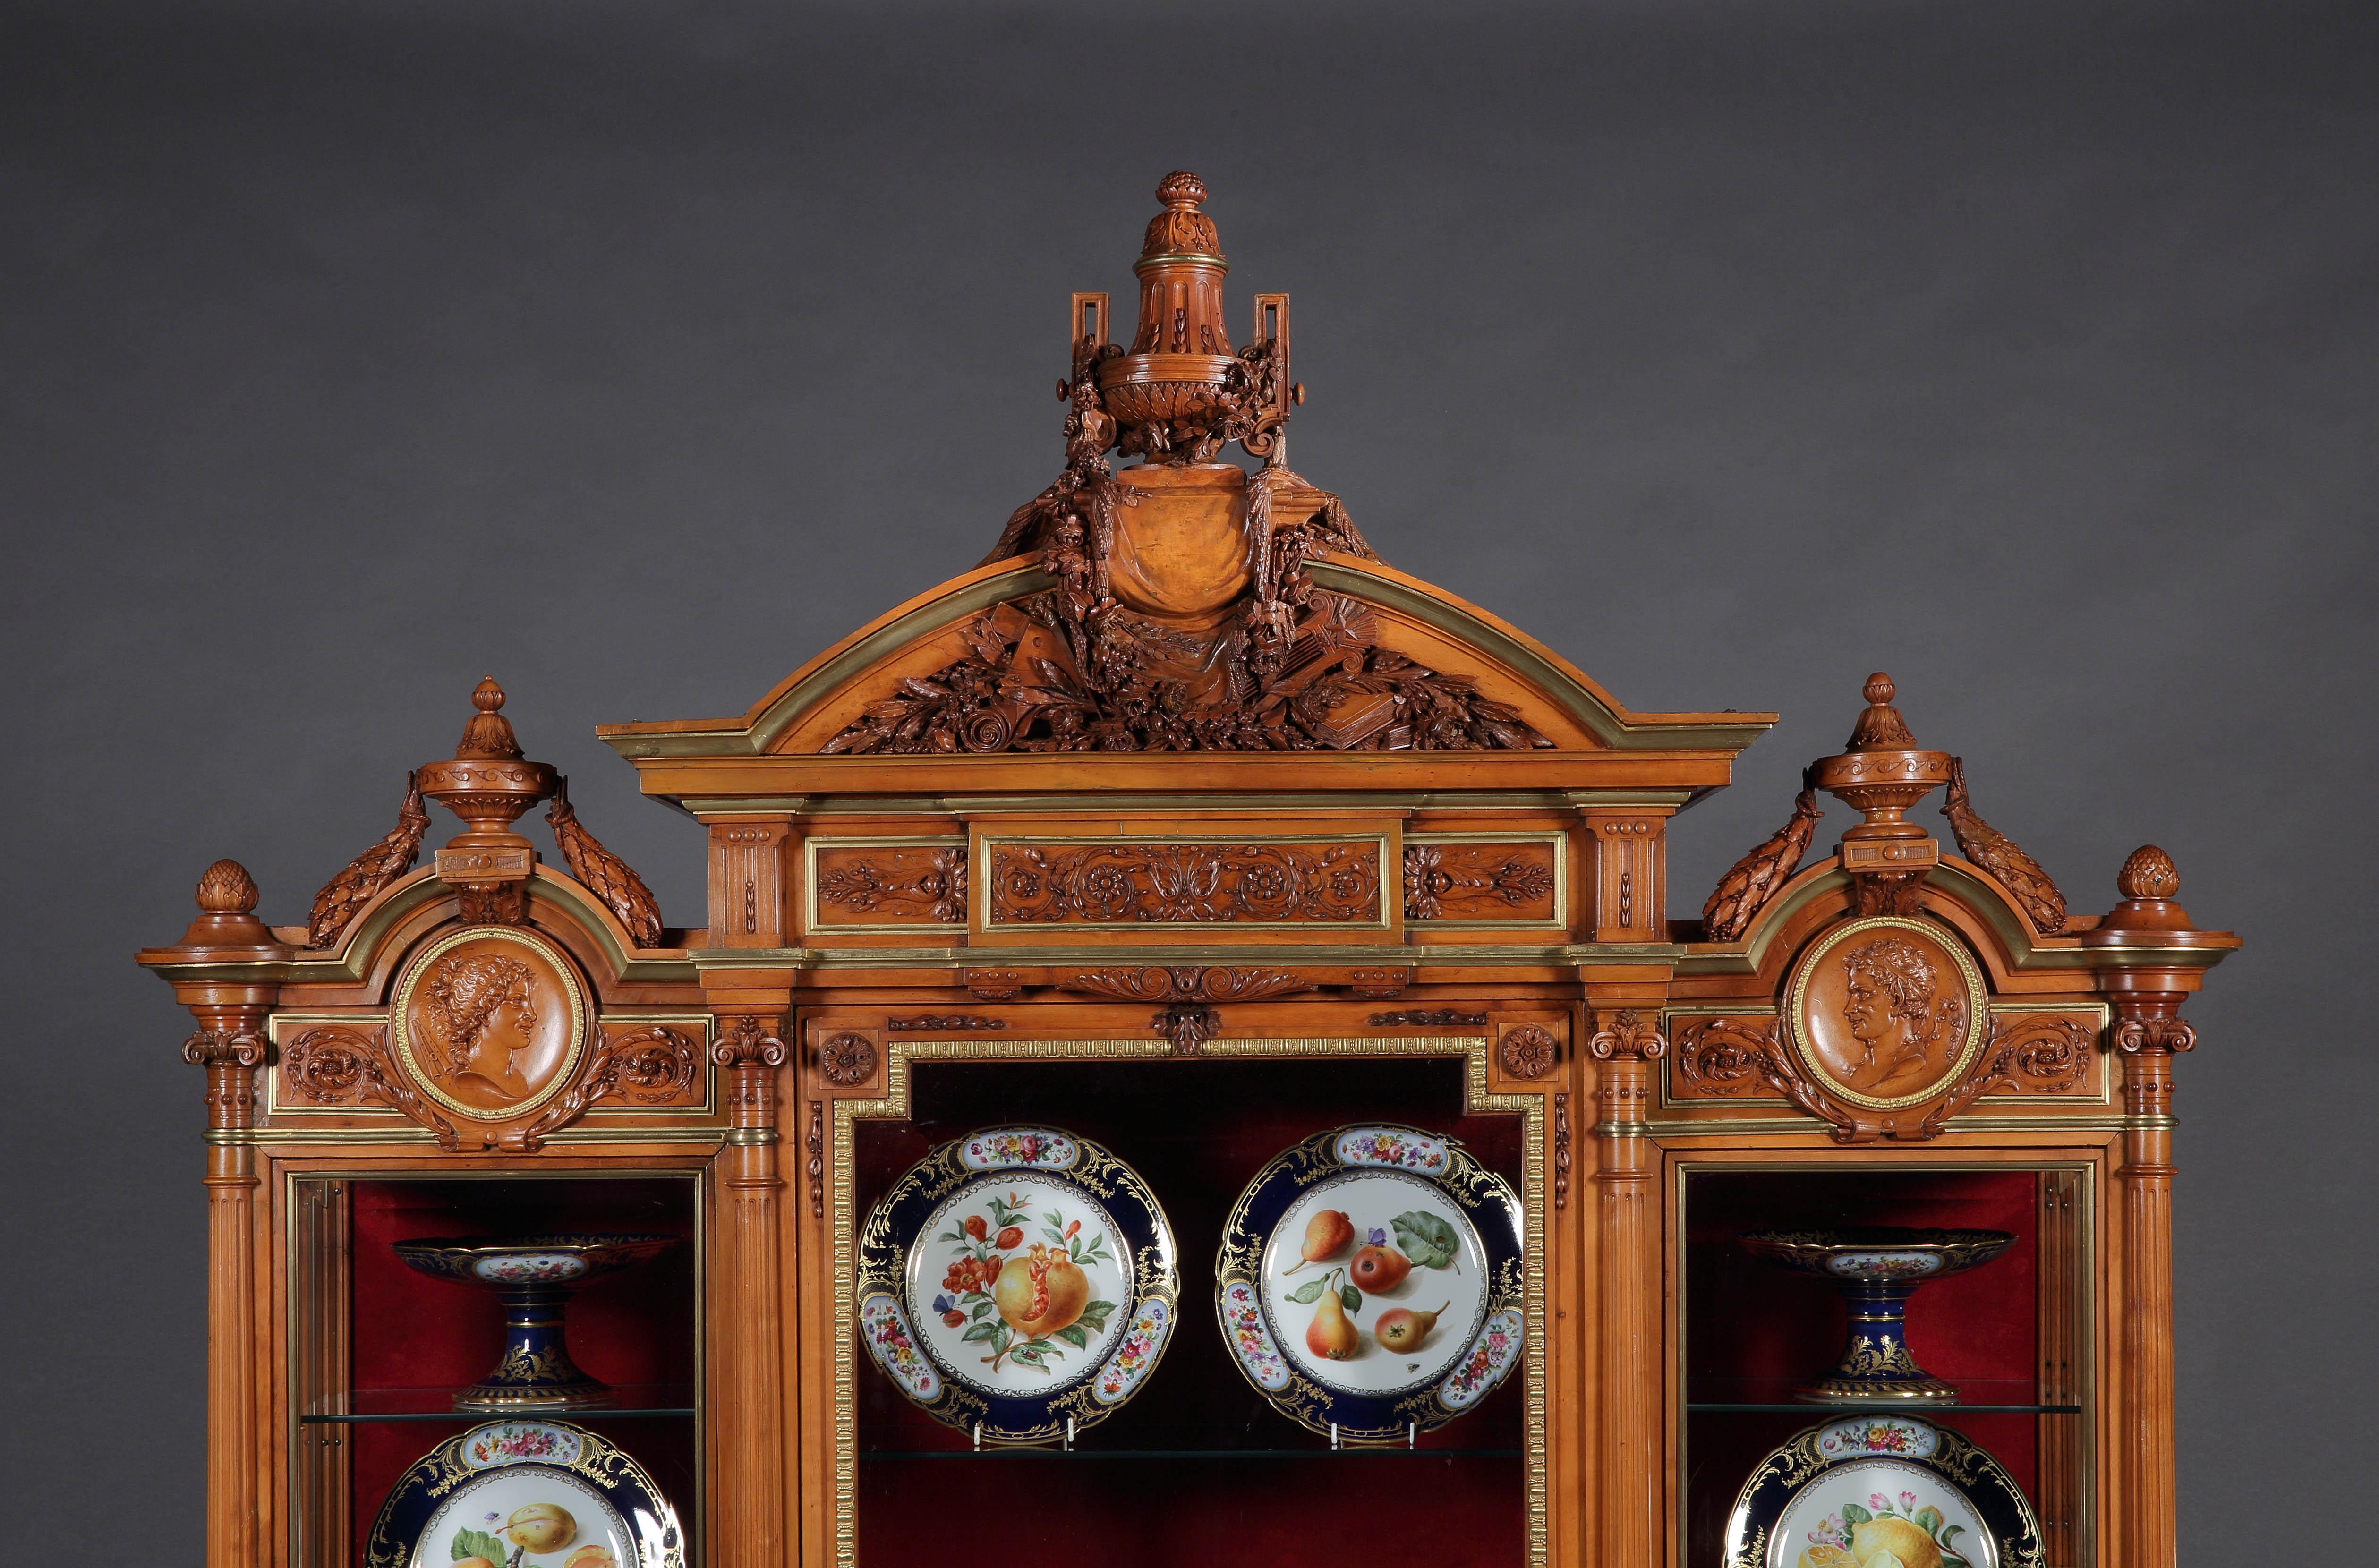 An Important Napoleon III Exhibition-Quality
Ormolu-Mounted Carved Cabinet
By Maison Guéret of Paris

A tour-de-force glazed boxwood cabinet celebrating the art of woodcarving, the monumental vitrine of slight breakfront proportions, with